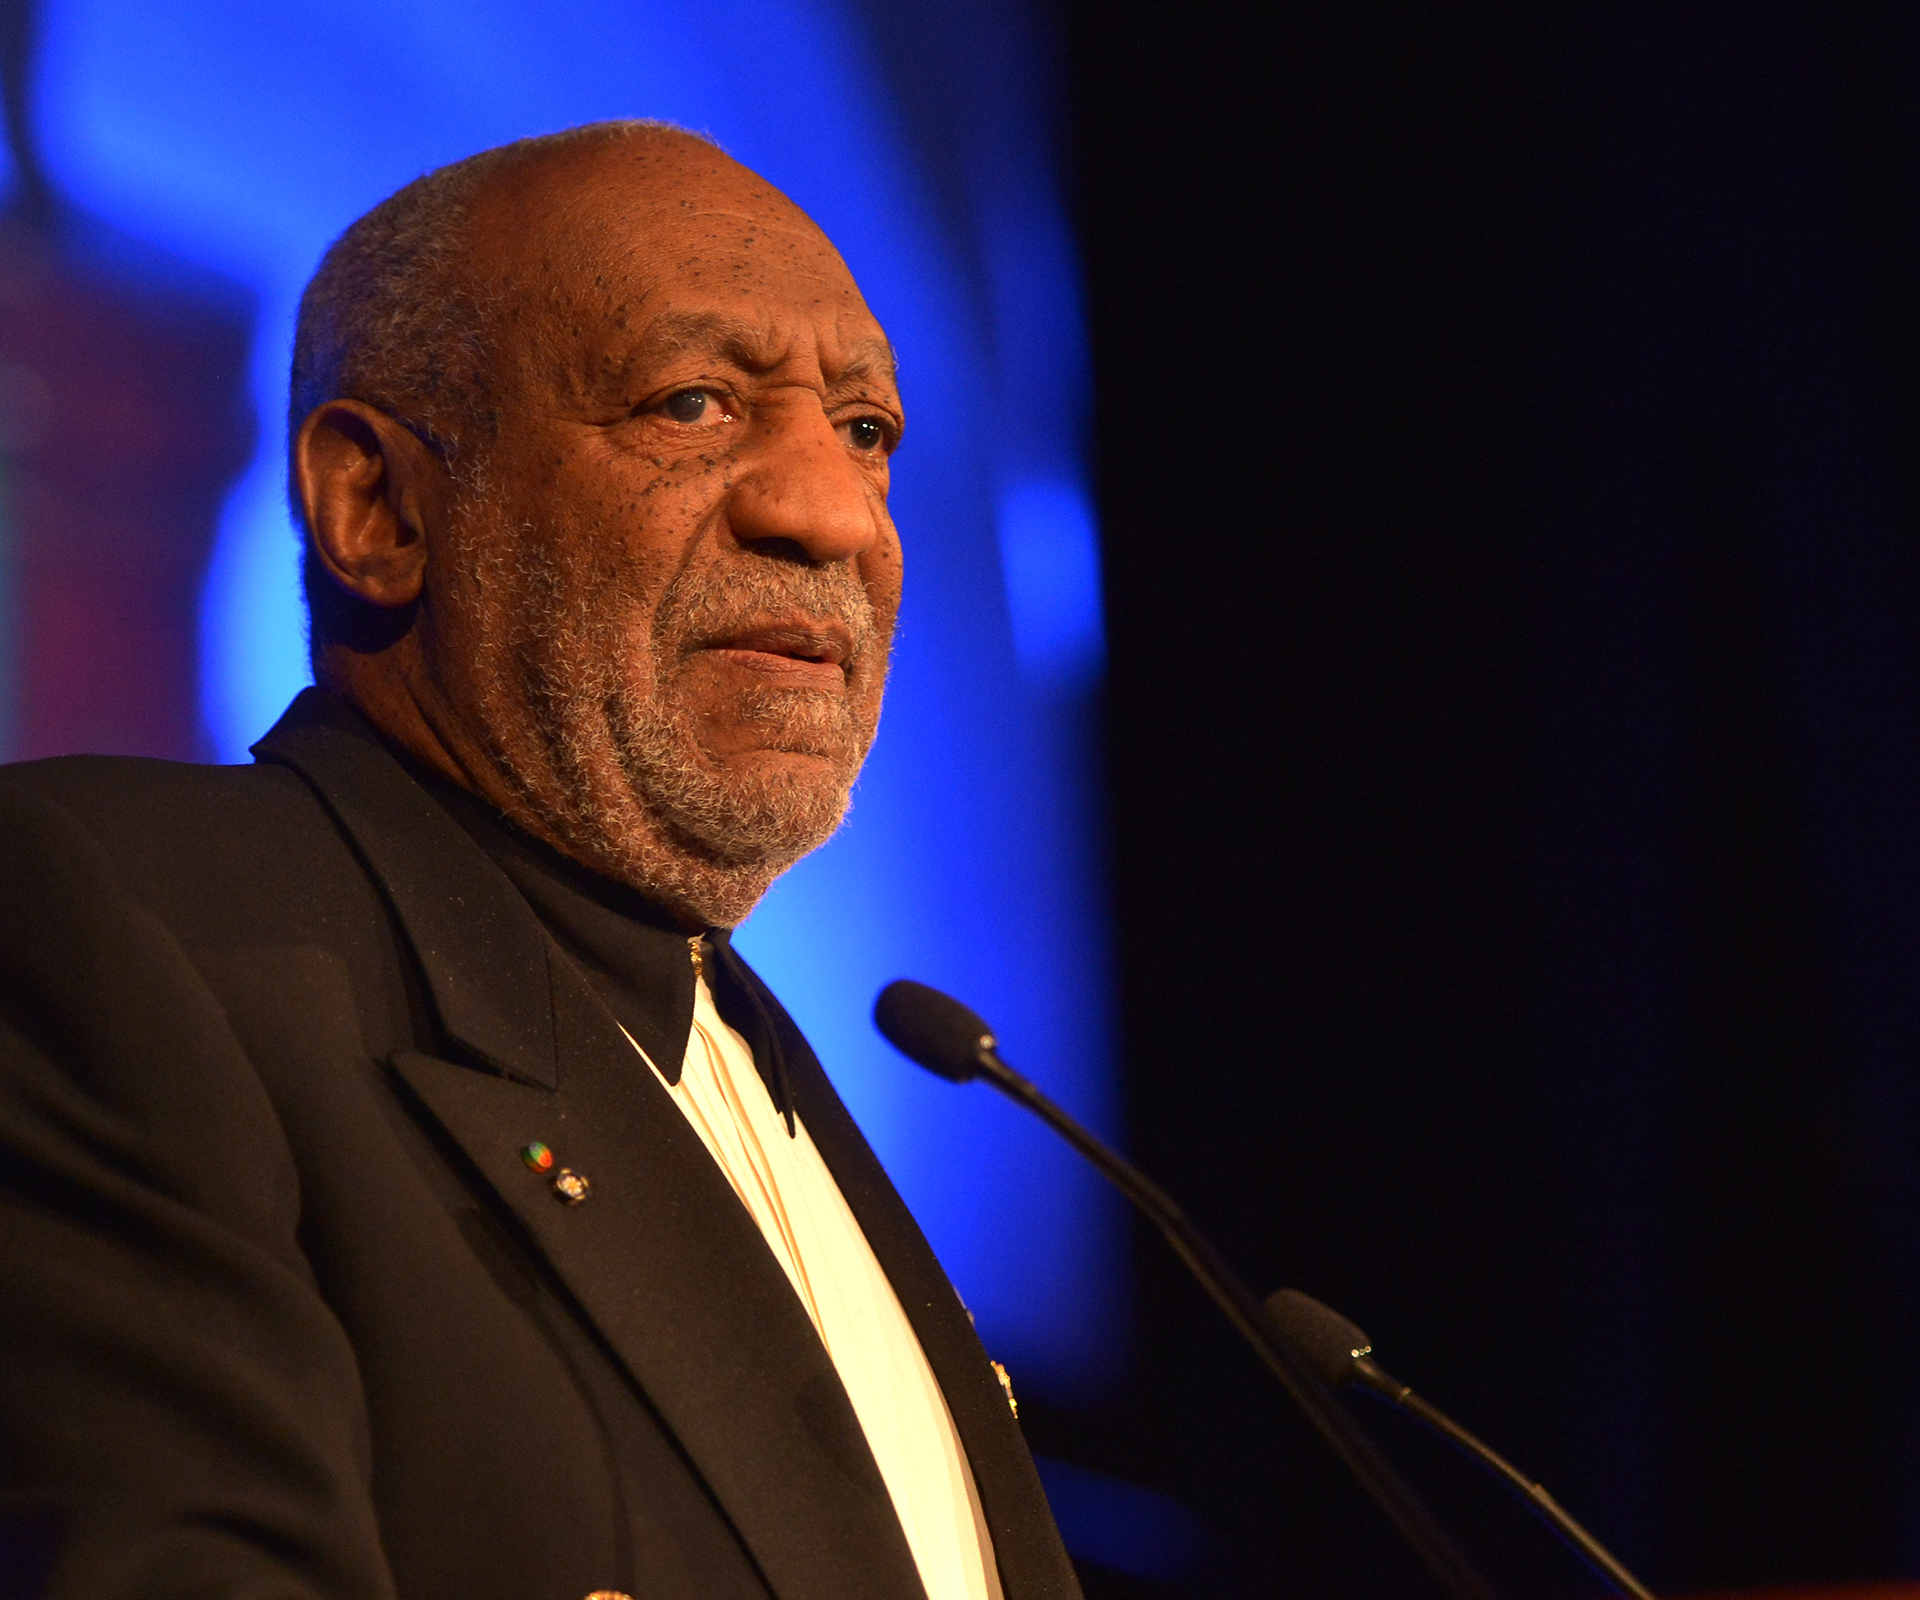 Investigation launched into allegations Bill Cosby drugged and raped 47 women